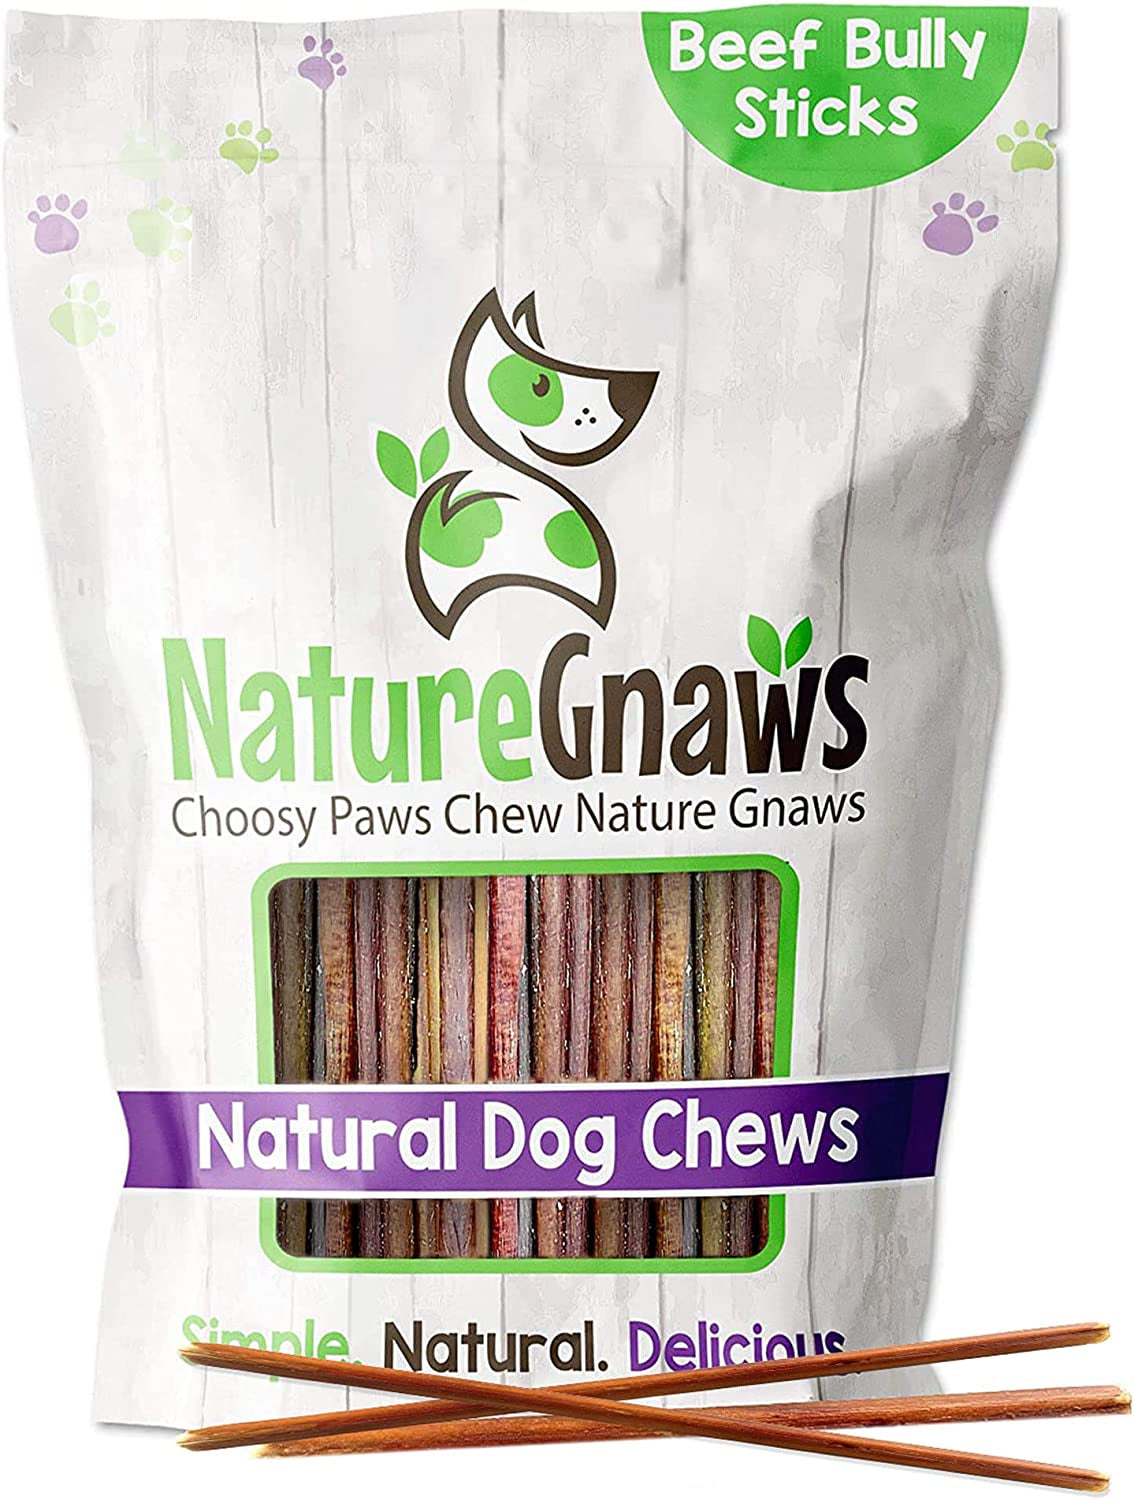 "Irresistible Skinny Bully Sticks for Small Dogs - 40 Premium Natural Beef Dental Bones - Perfect Thin Chew Treats for Toy Breeds & Puppies - Rawhide Free!"